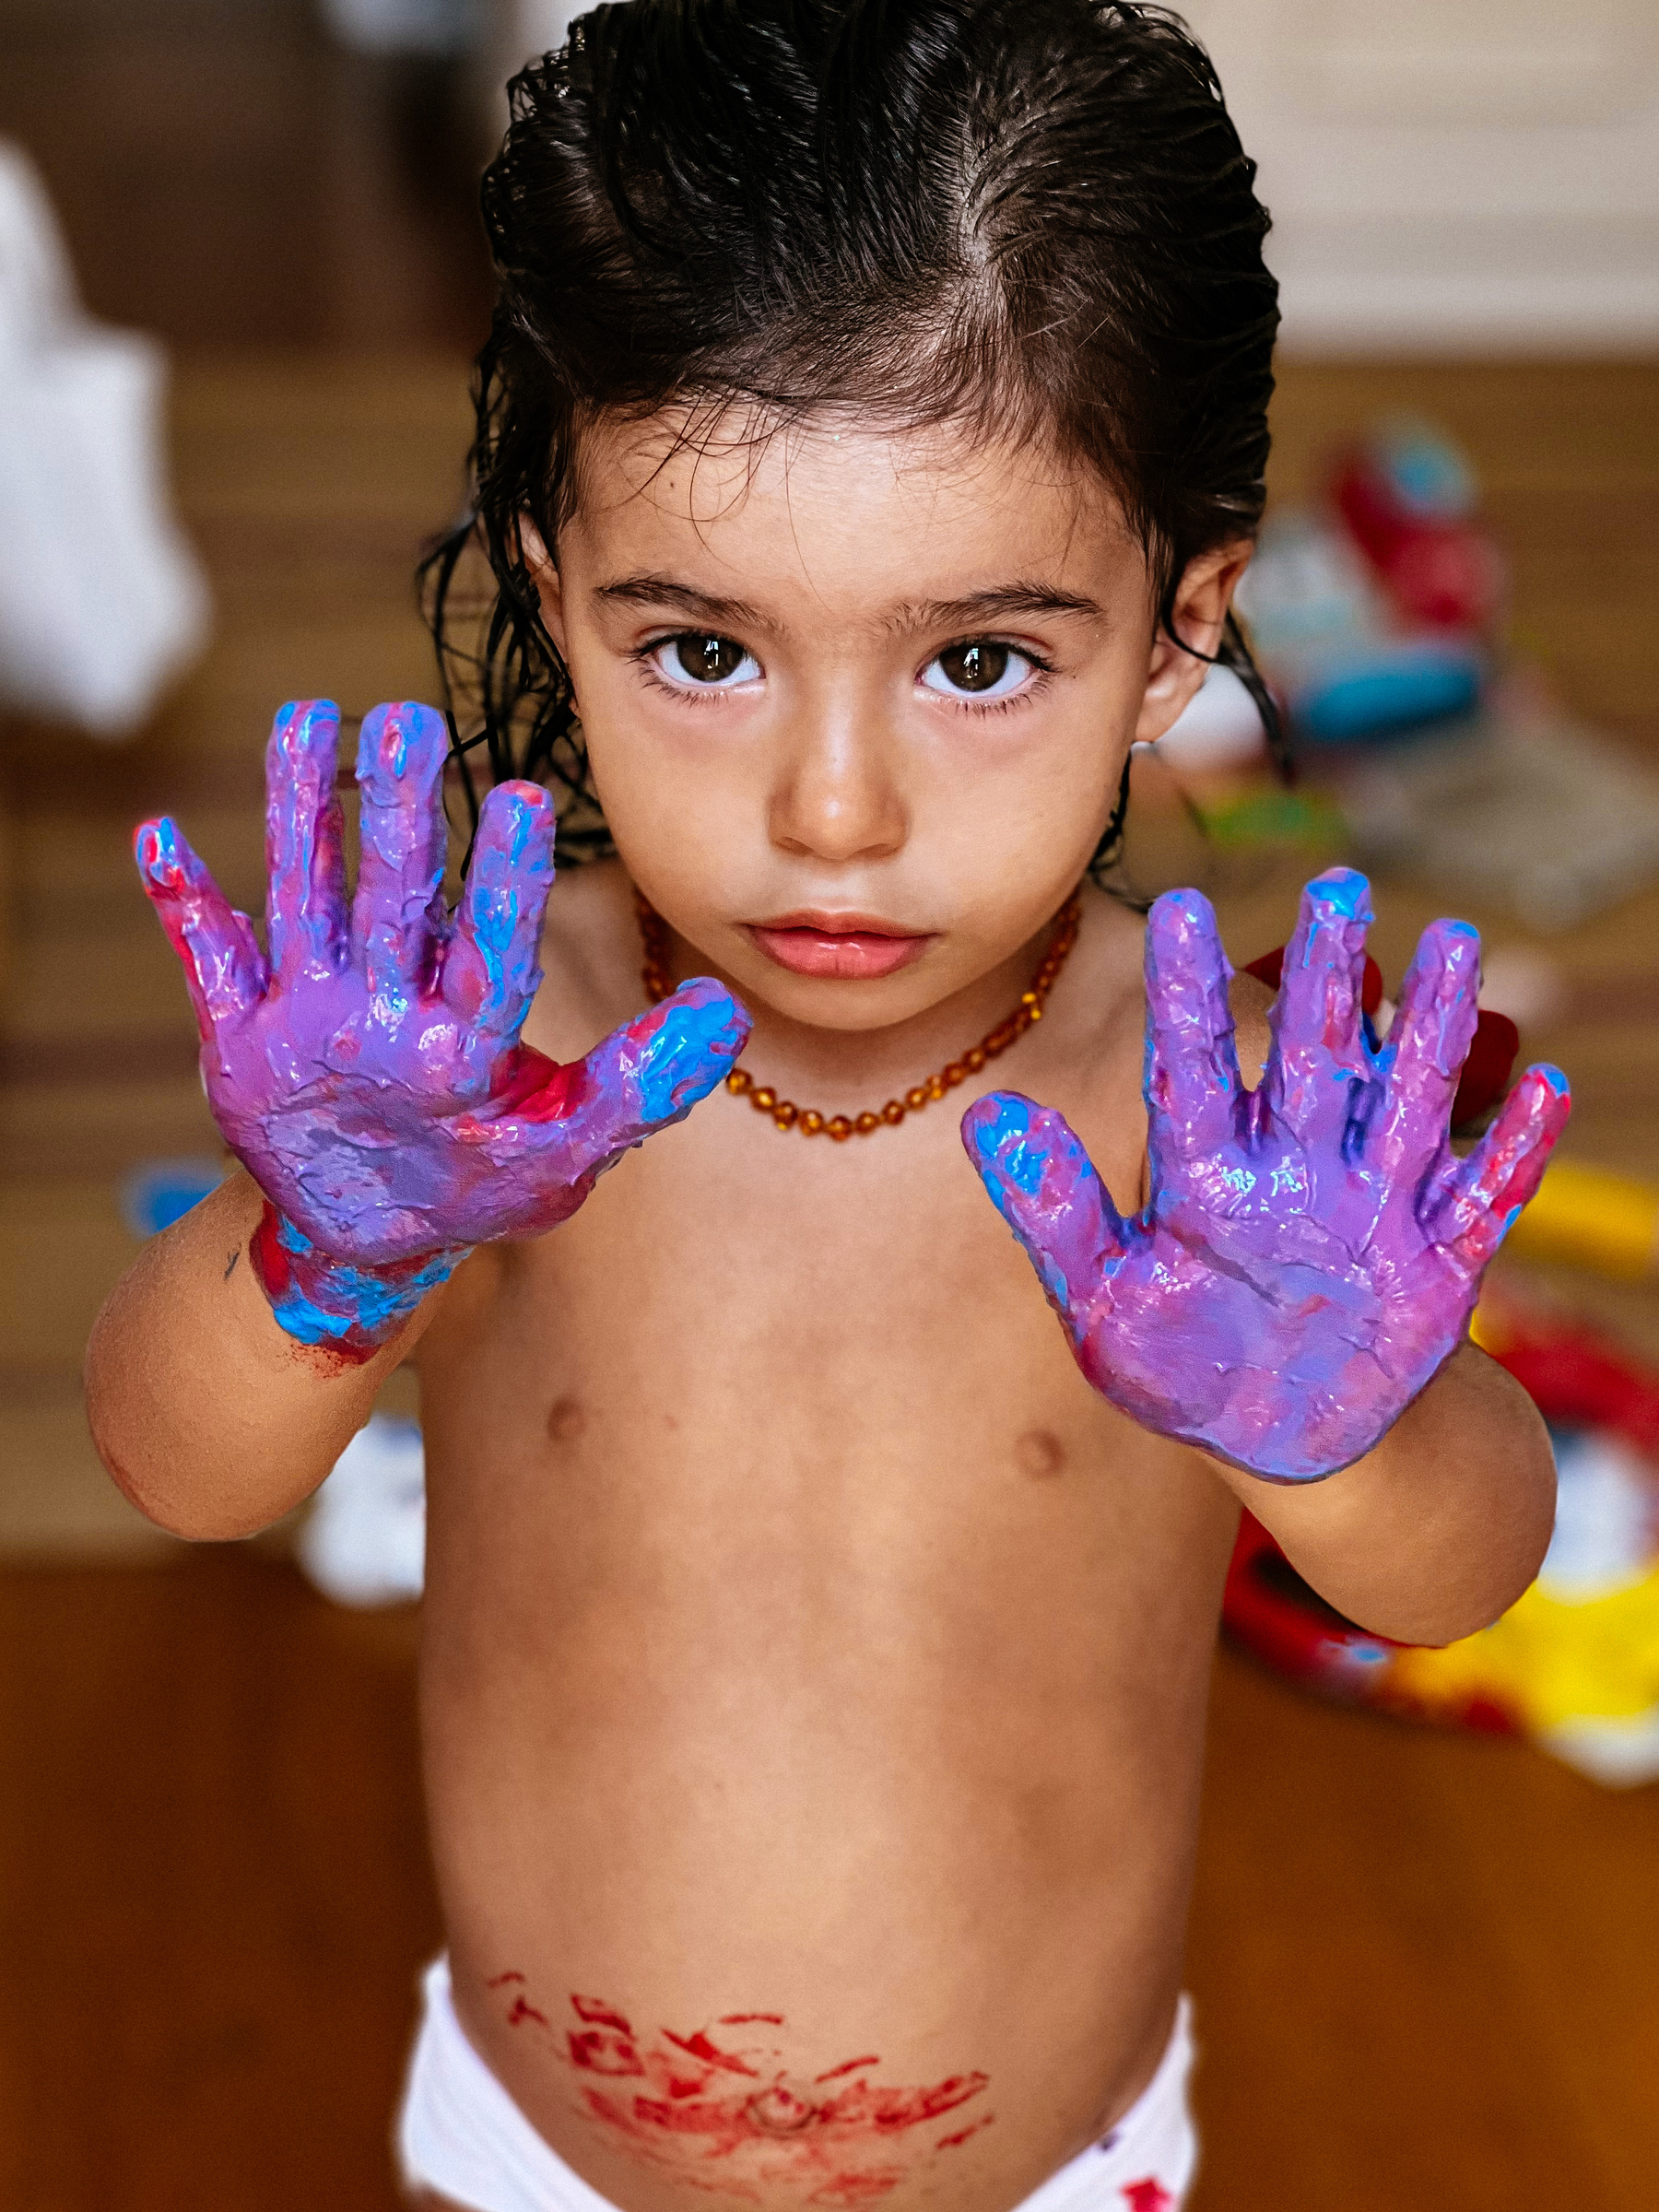 Toddler shows off her paint covered hands